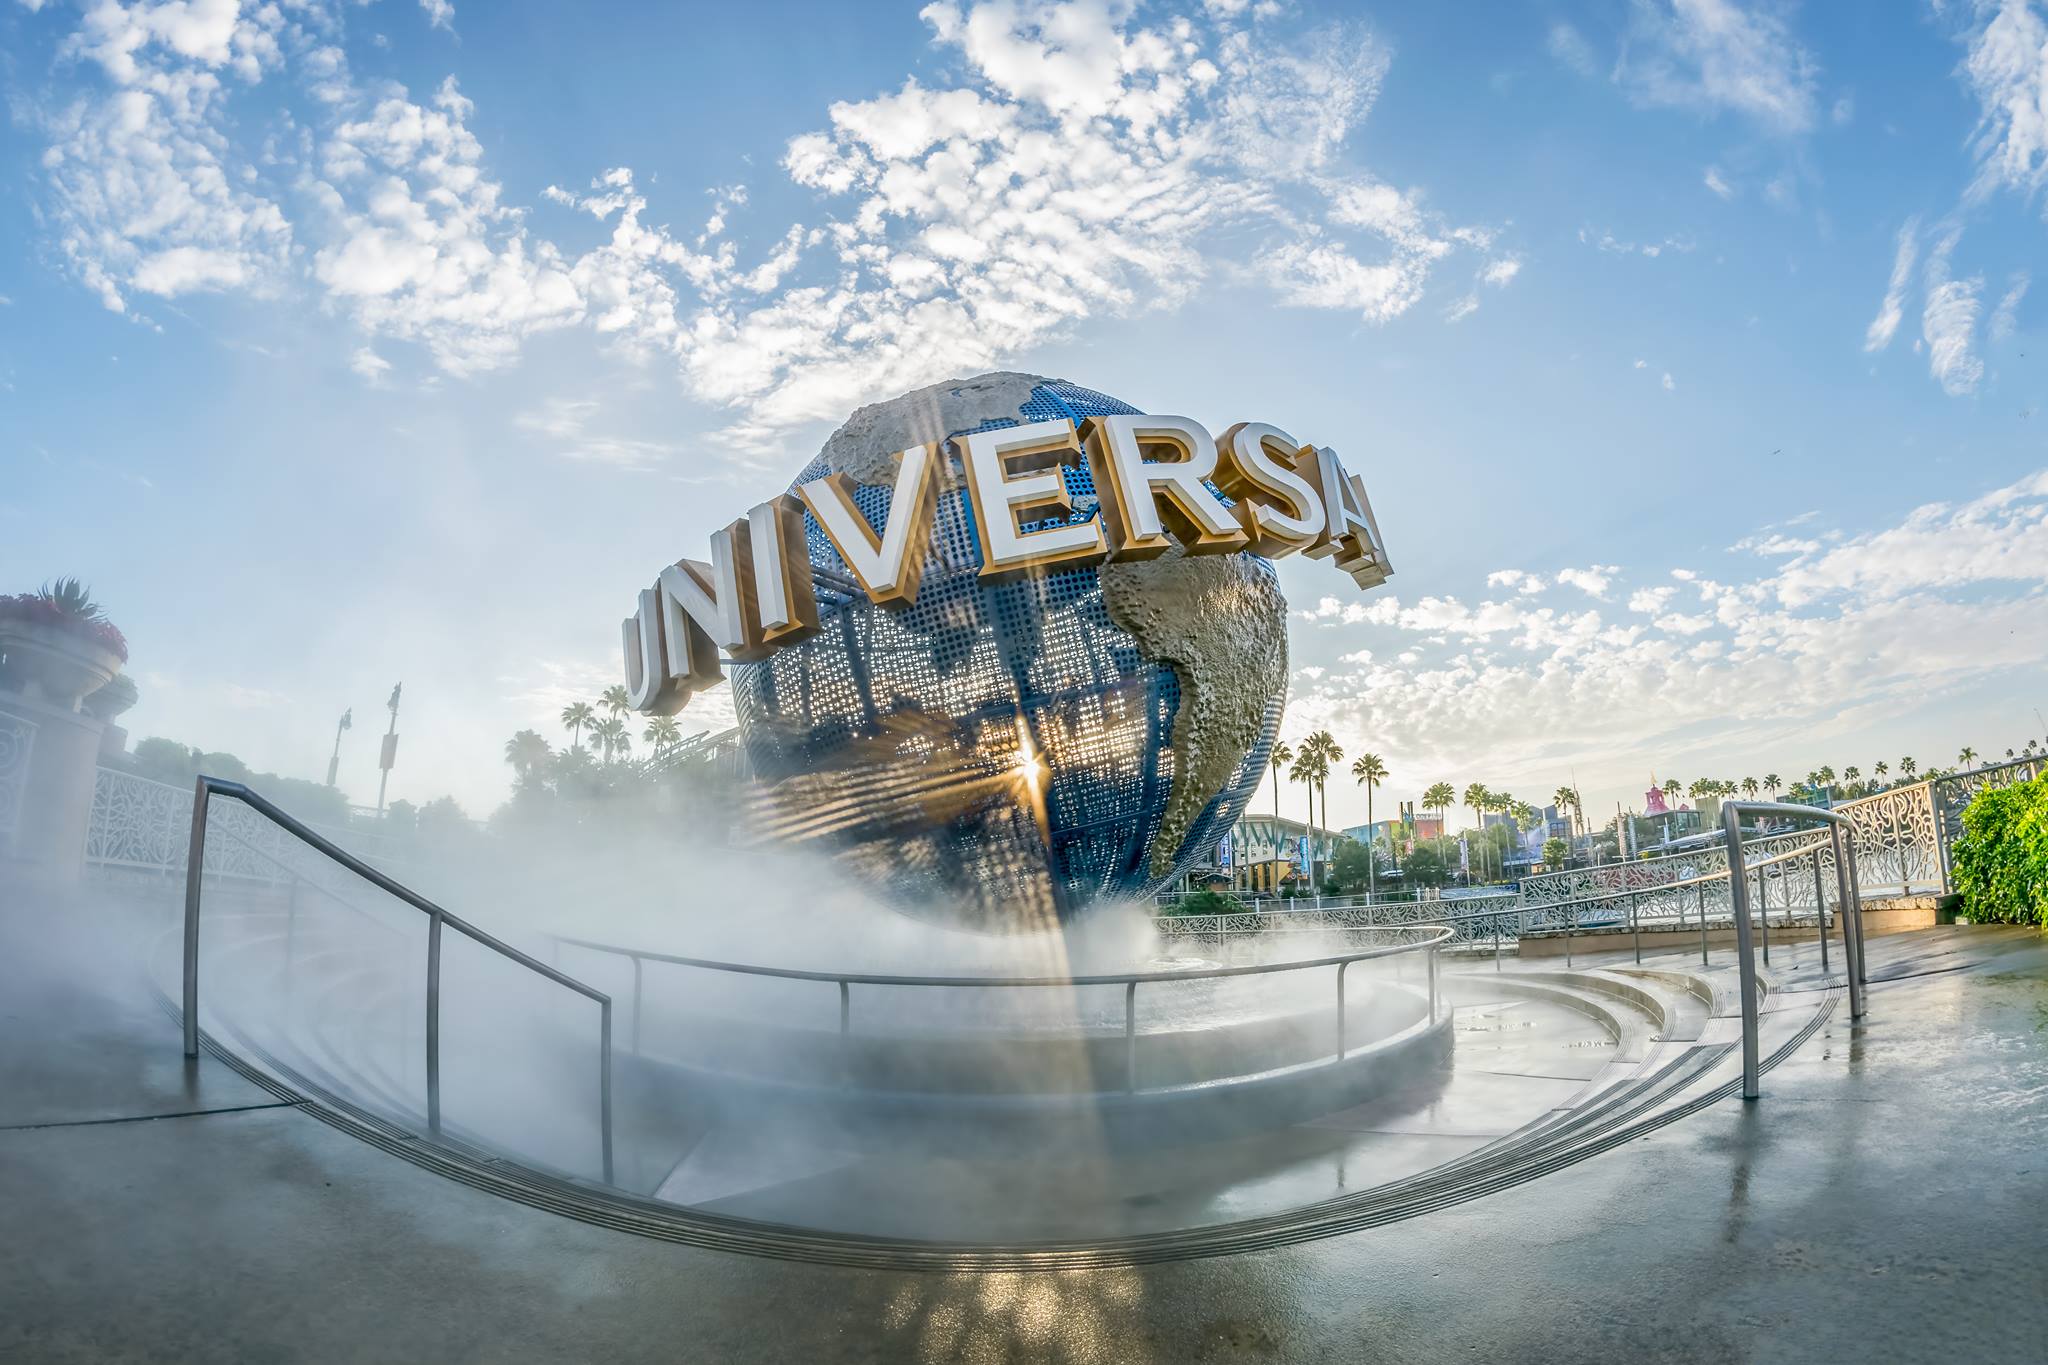 New Universal Orlando hotels from $76 a night